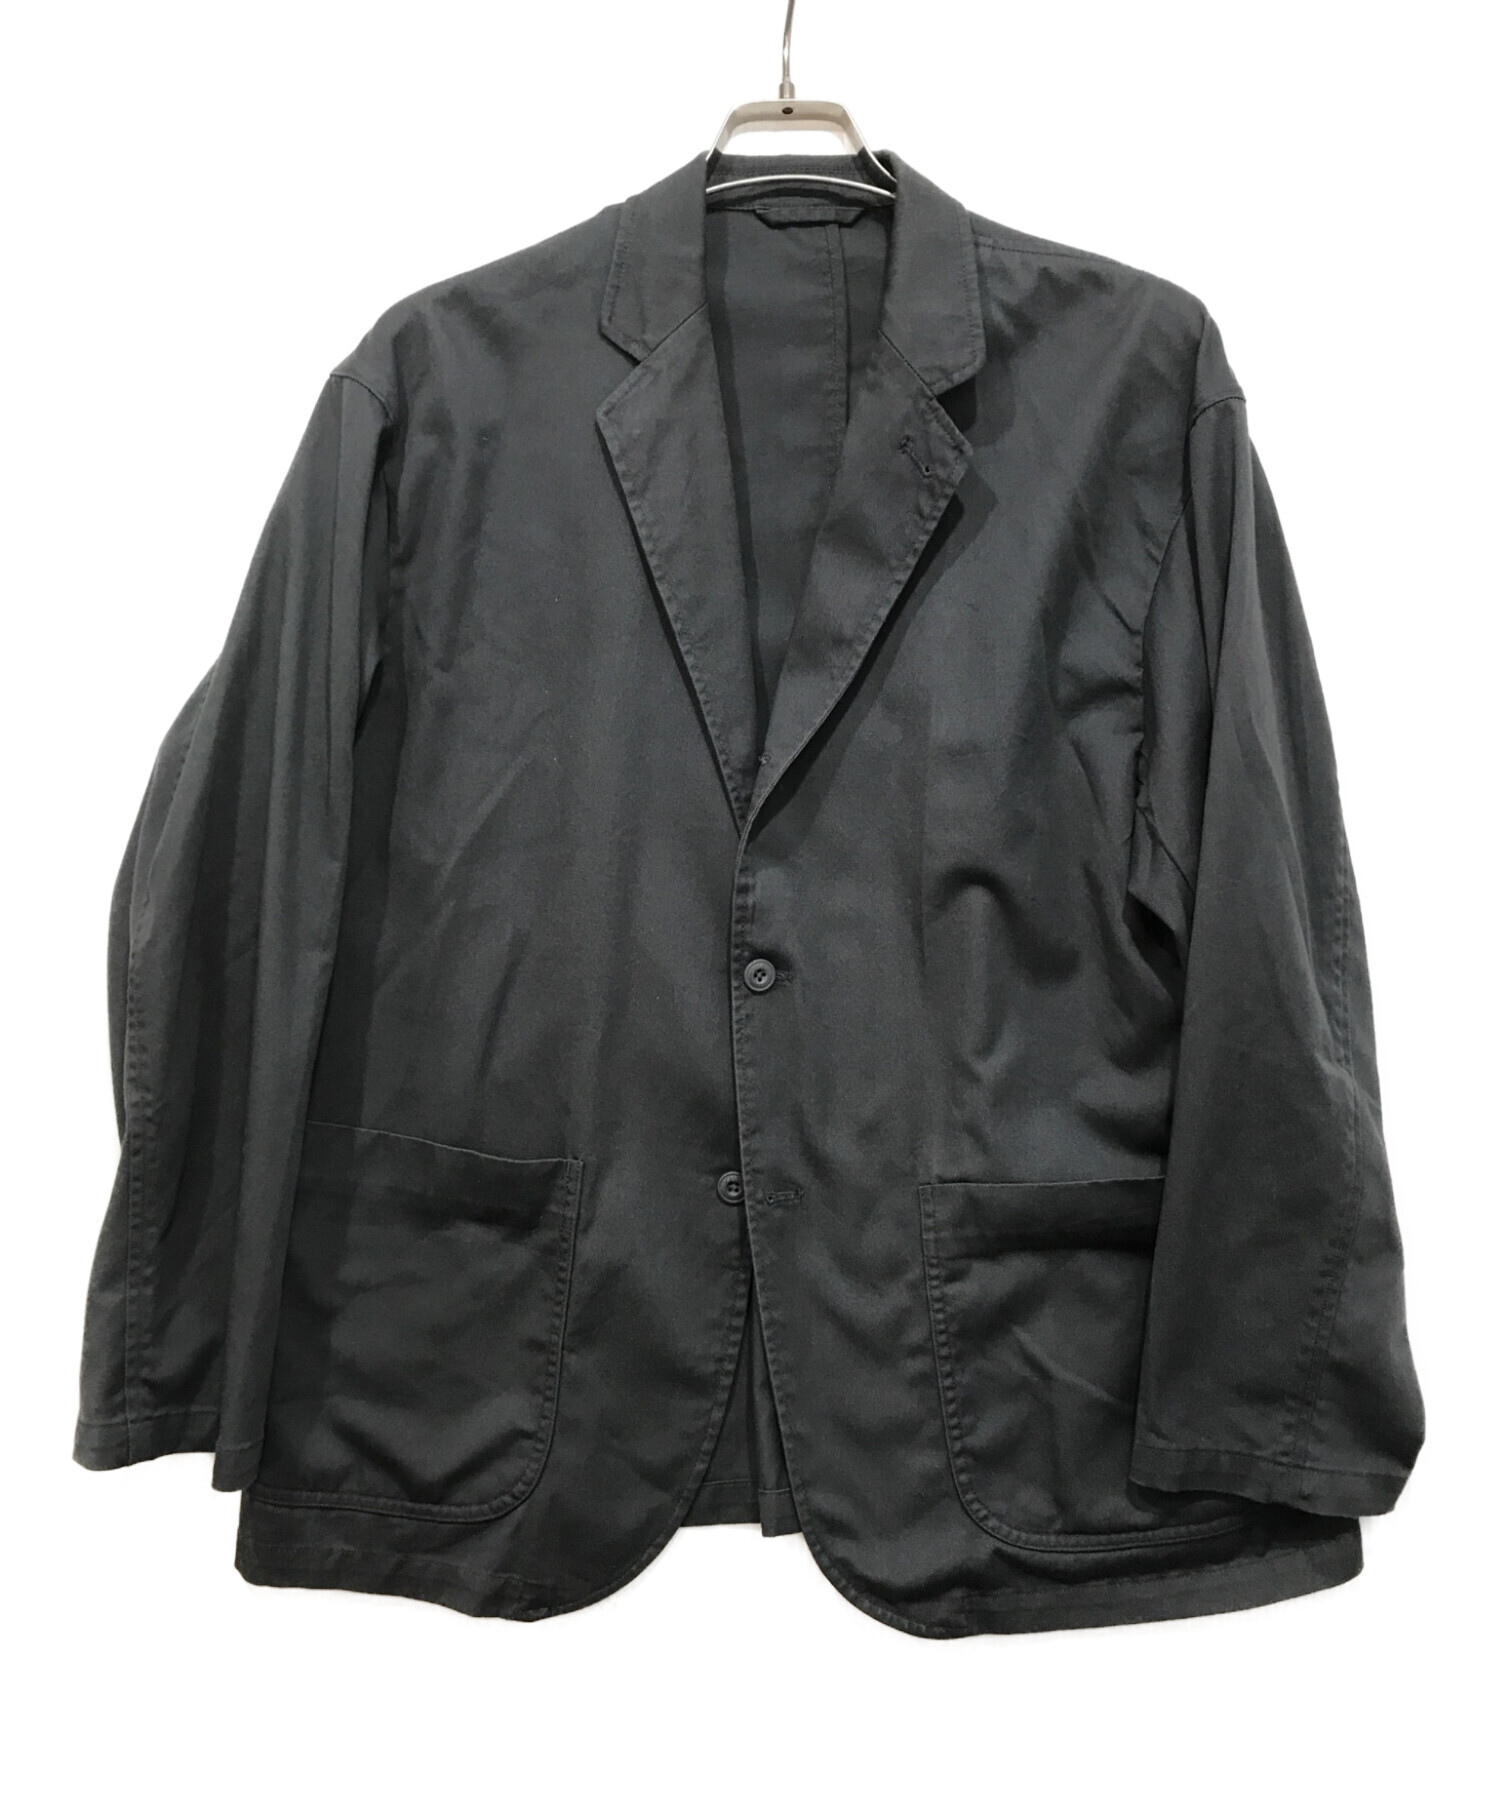 BEAMS Dickies Tripster セットアップ M 黒セットアップ - セットアップ